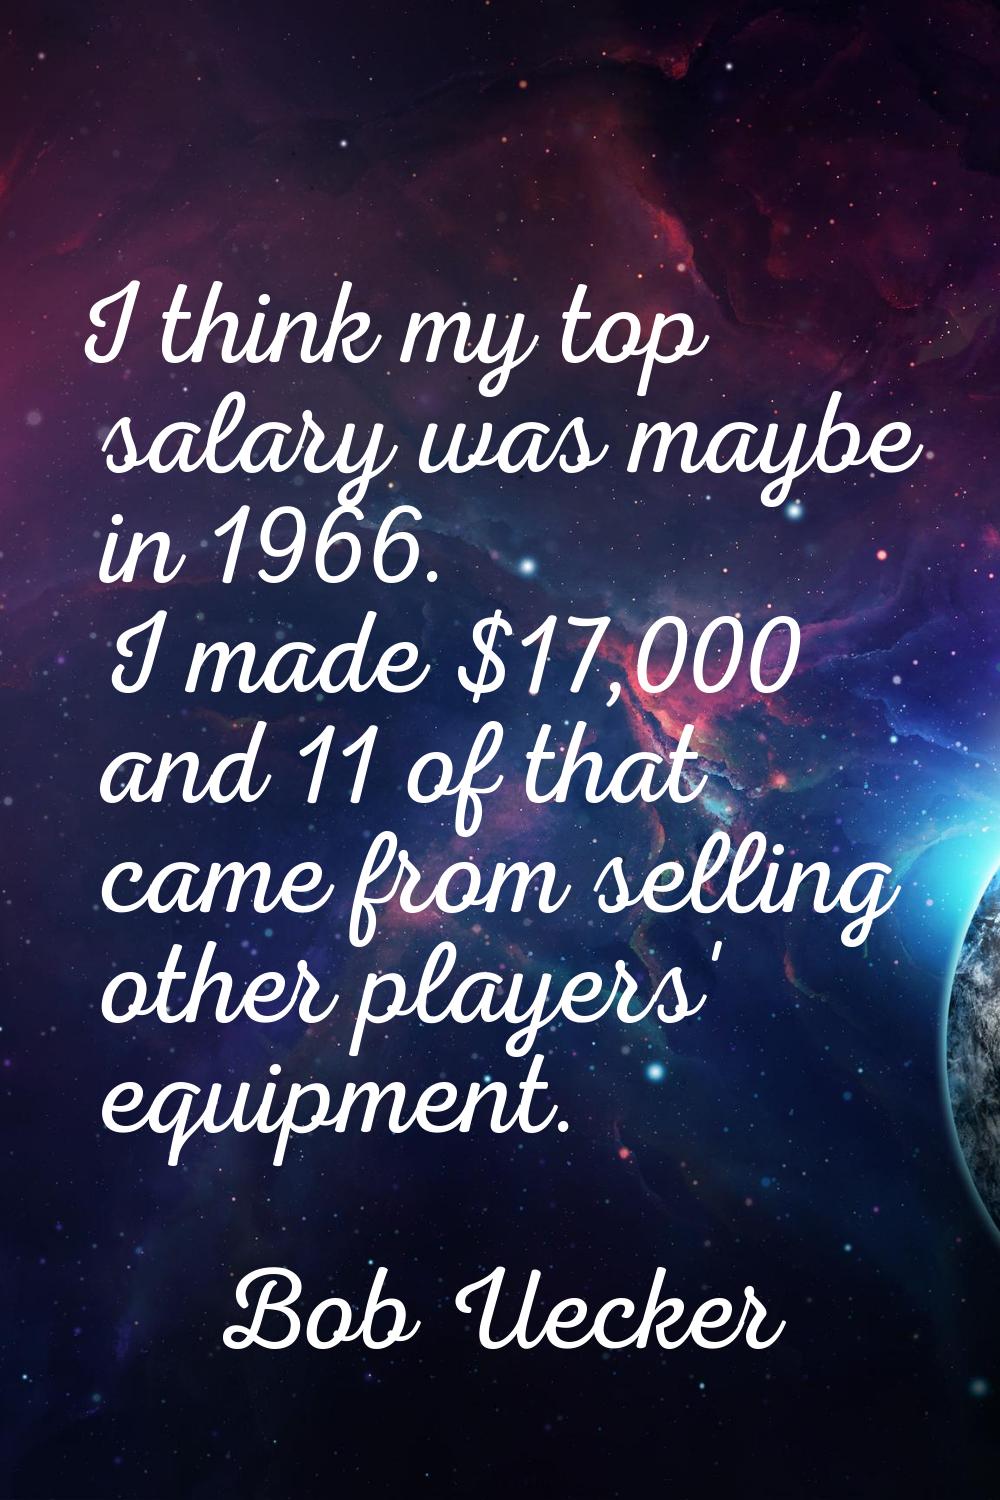 I think my top salary was maybe in 1966. I made $17,000 and 11 of that came from selling other play